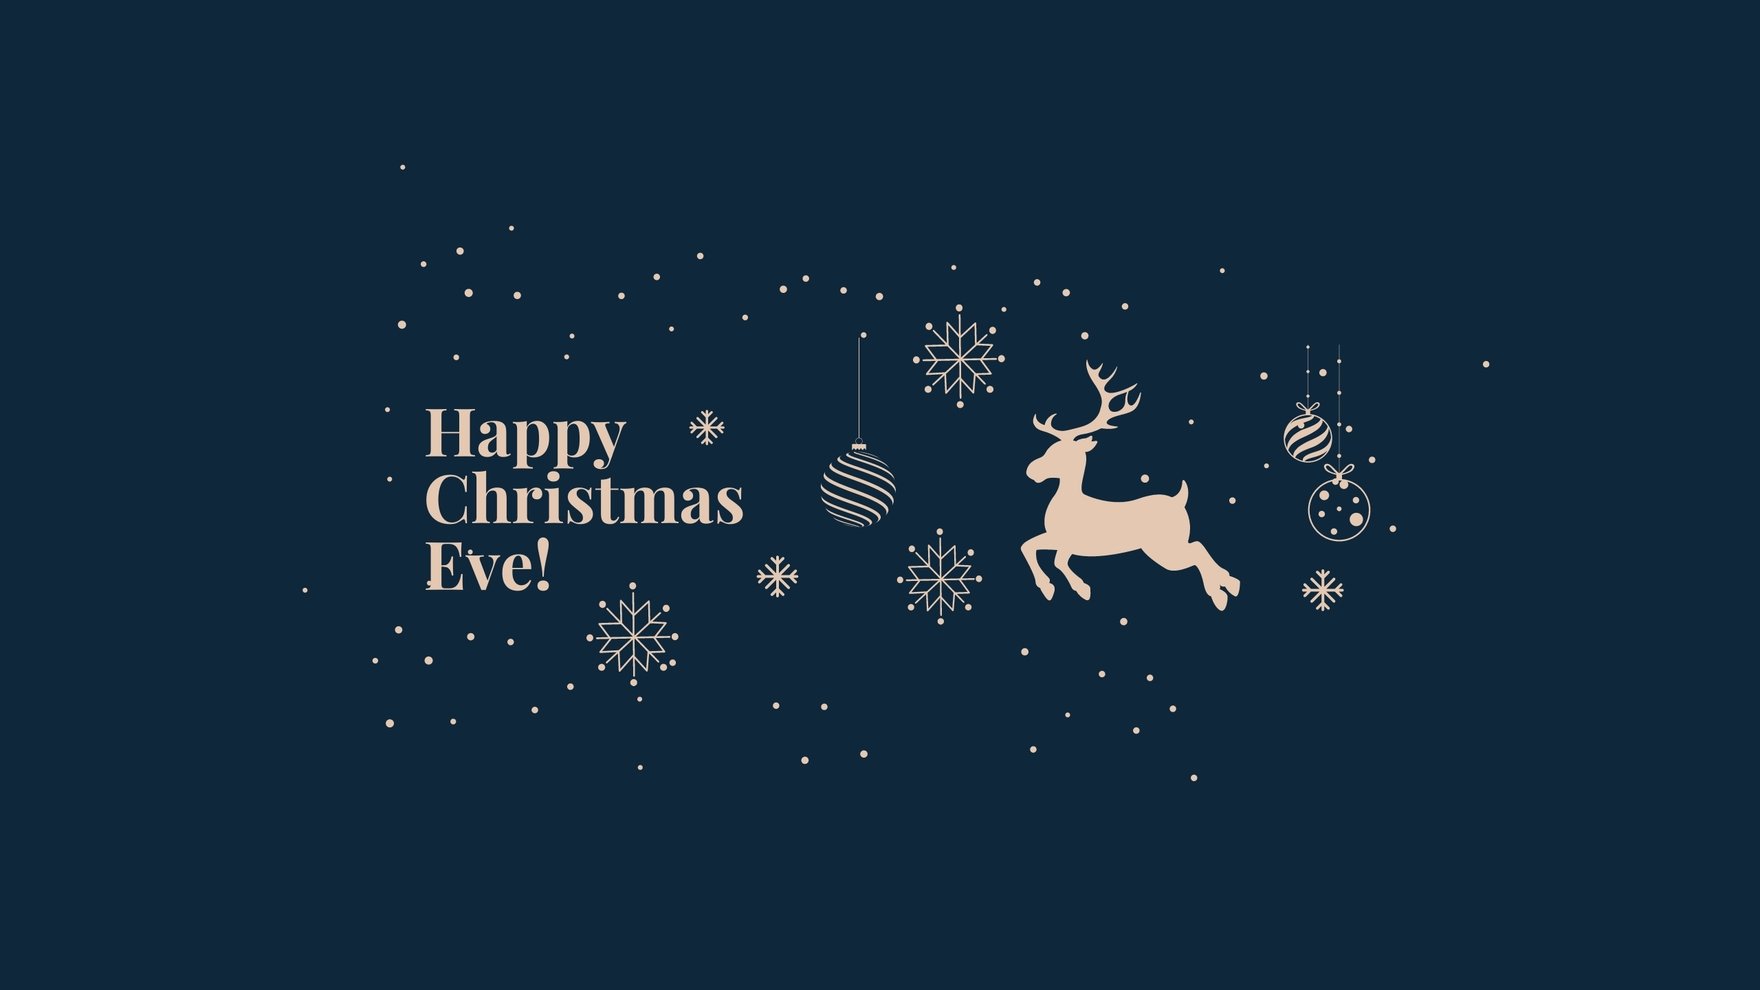 Free Christmas Eve YouTube Banner Template